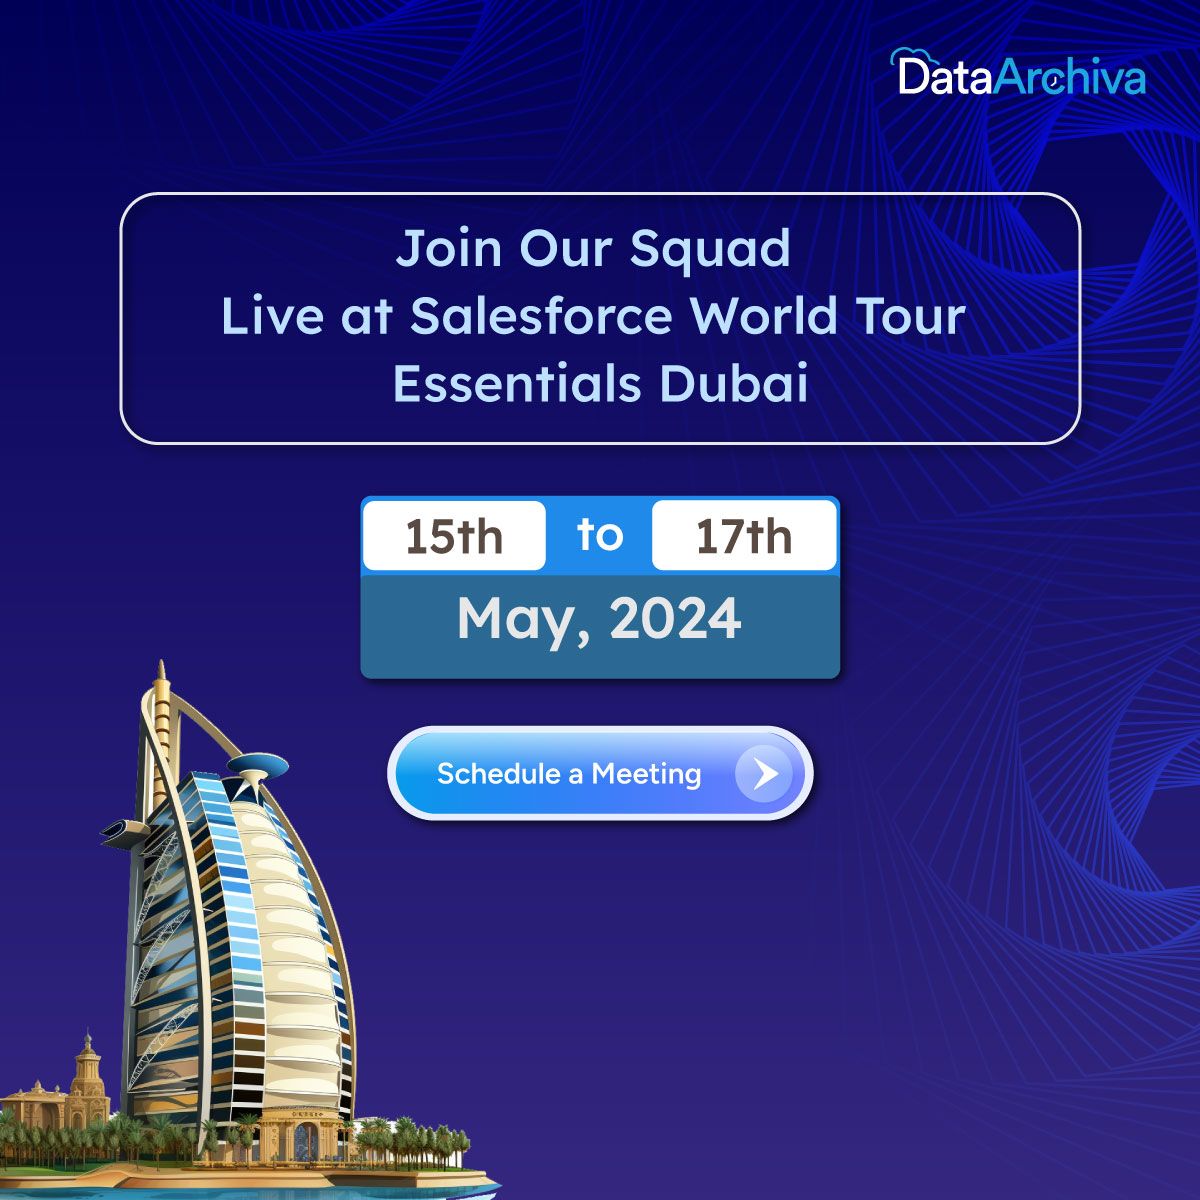 🌟 Dive into the future of business with us in Dubai at Salesforce World Tour Essentials! 🚀 

Learn More ➡ buff.ly/3wtTkUf

#SalesforceTour #SalesforceWorldTour #WorldTourEssentials2024 
#WorldTourEssentialsDubai #DataArchiva #Data #DataProtection